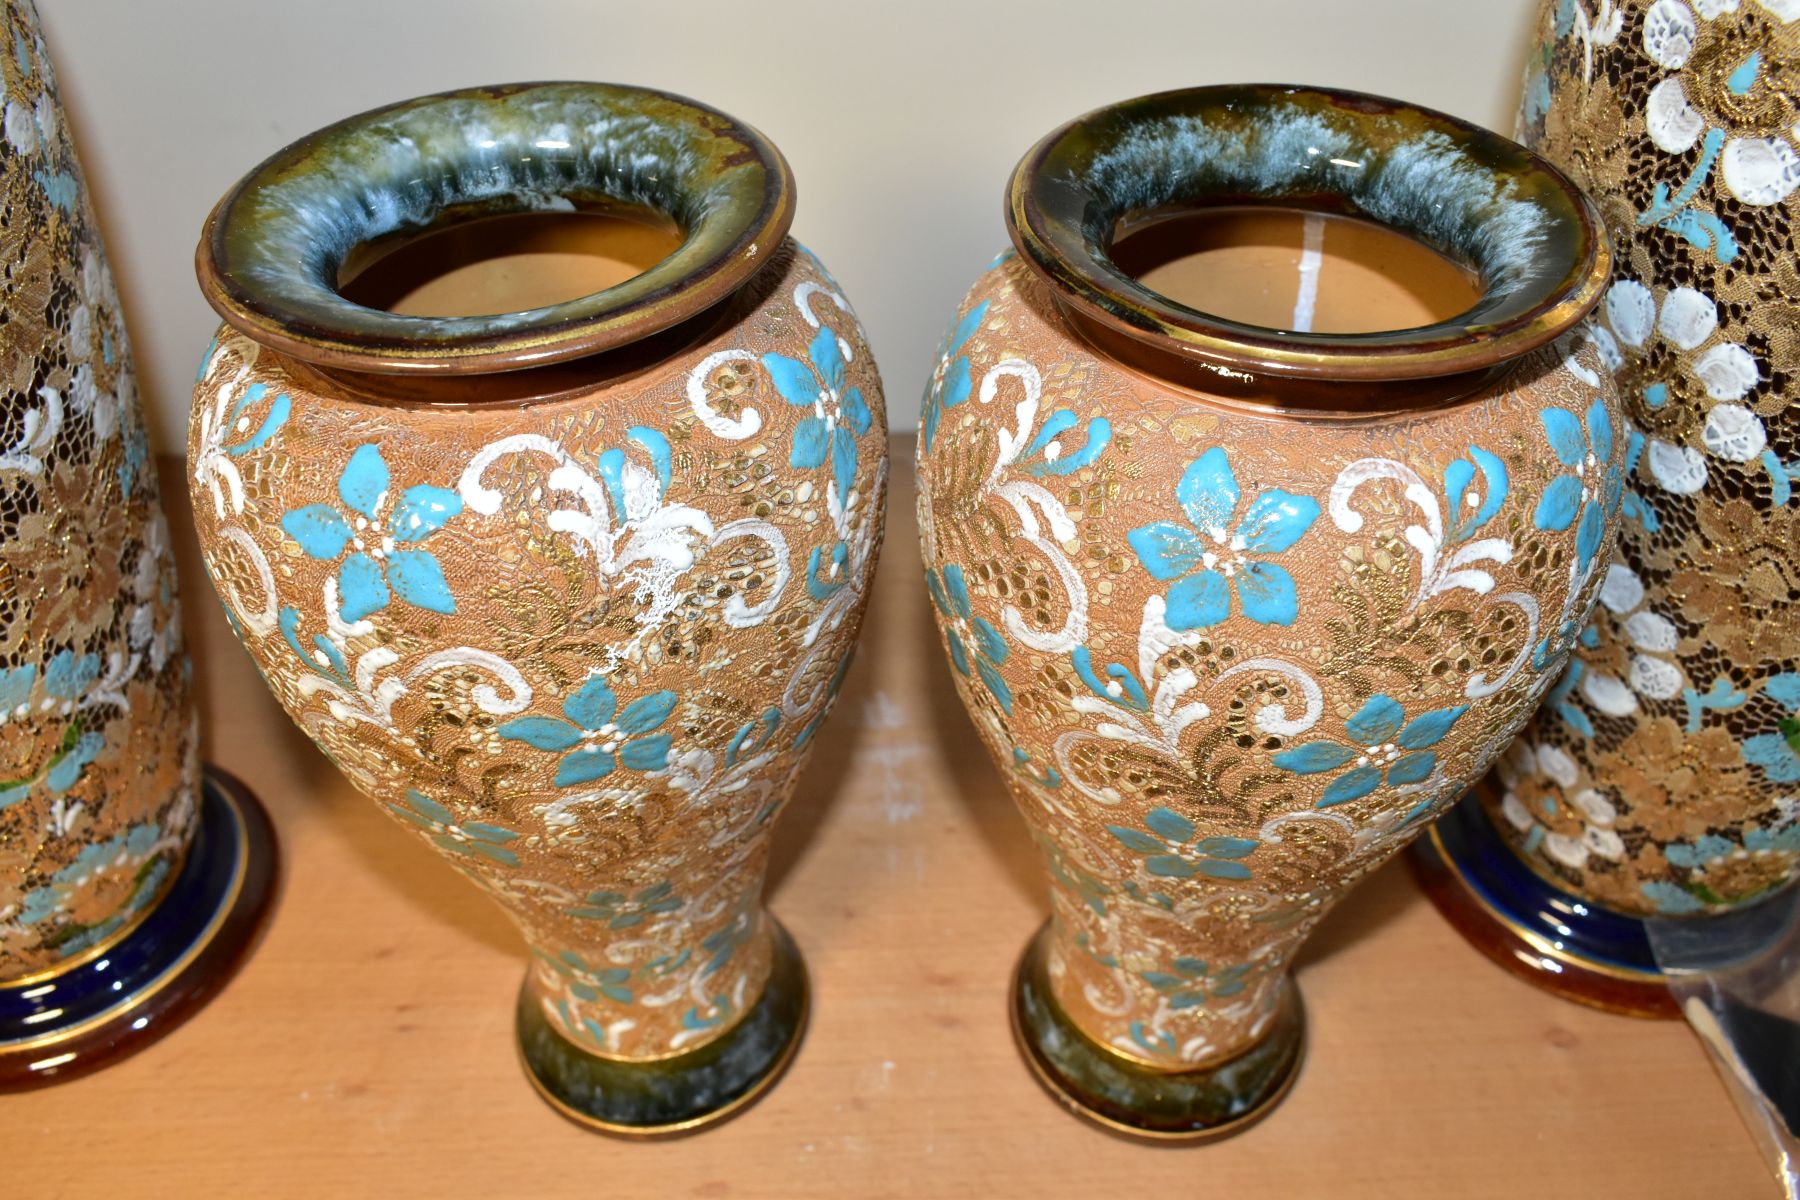 TWO PAIRS OF ROYAL DOULTON SLATERS PATENT BALUSTER VASES, the taller pair with flared rims, one with - Image 4 of 9